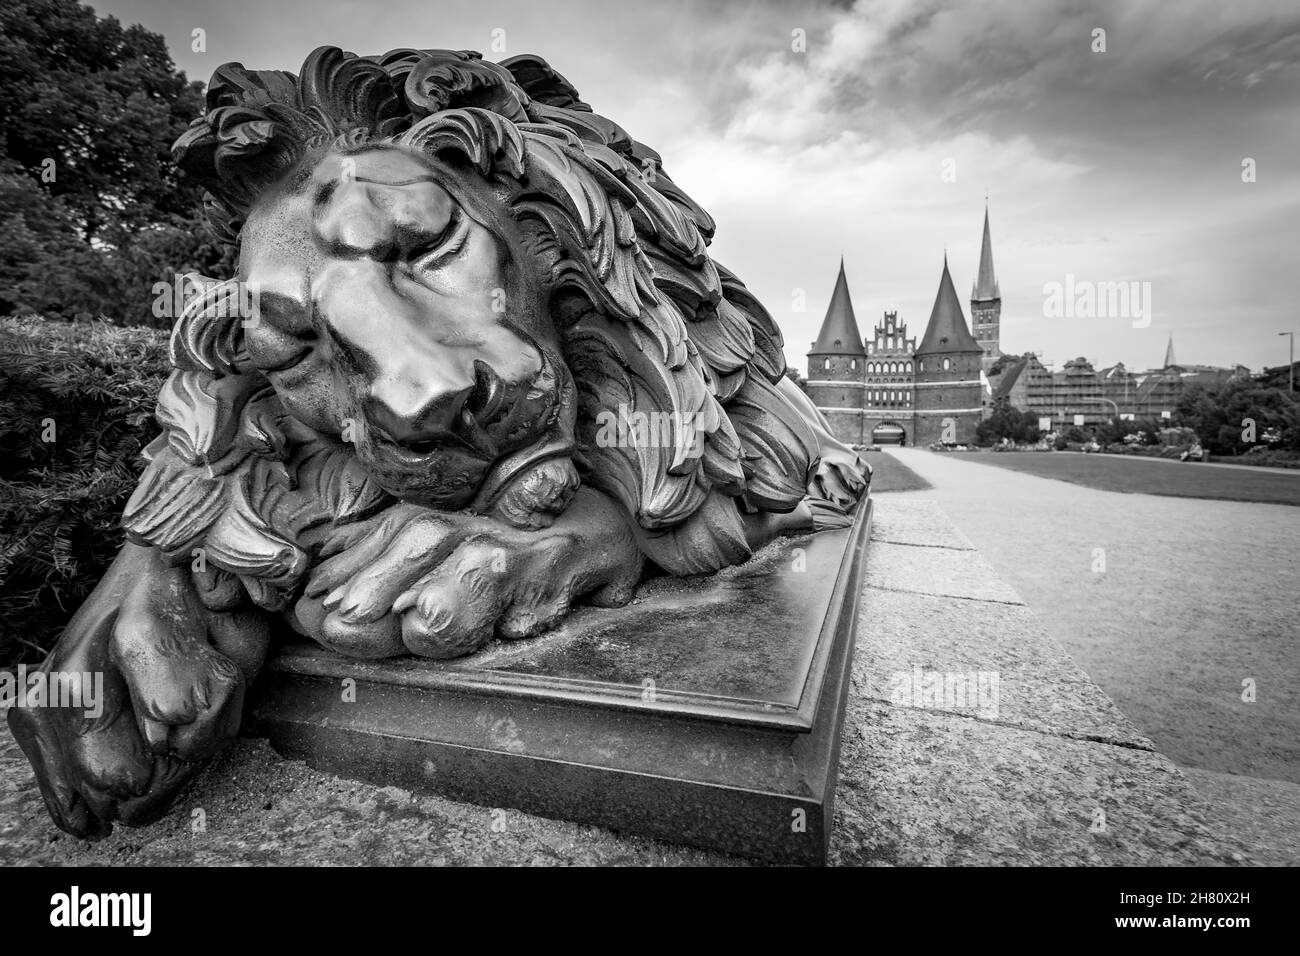 Statue Of Sleeping Lion ( 1823, Attributed to Christian Daniel Rauch) near Holsten Gate in Lubeck, Germany. Black and white photography Stock Photo